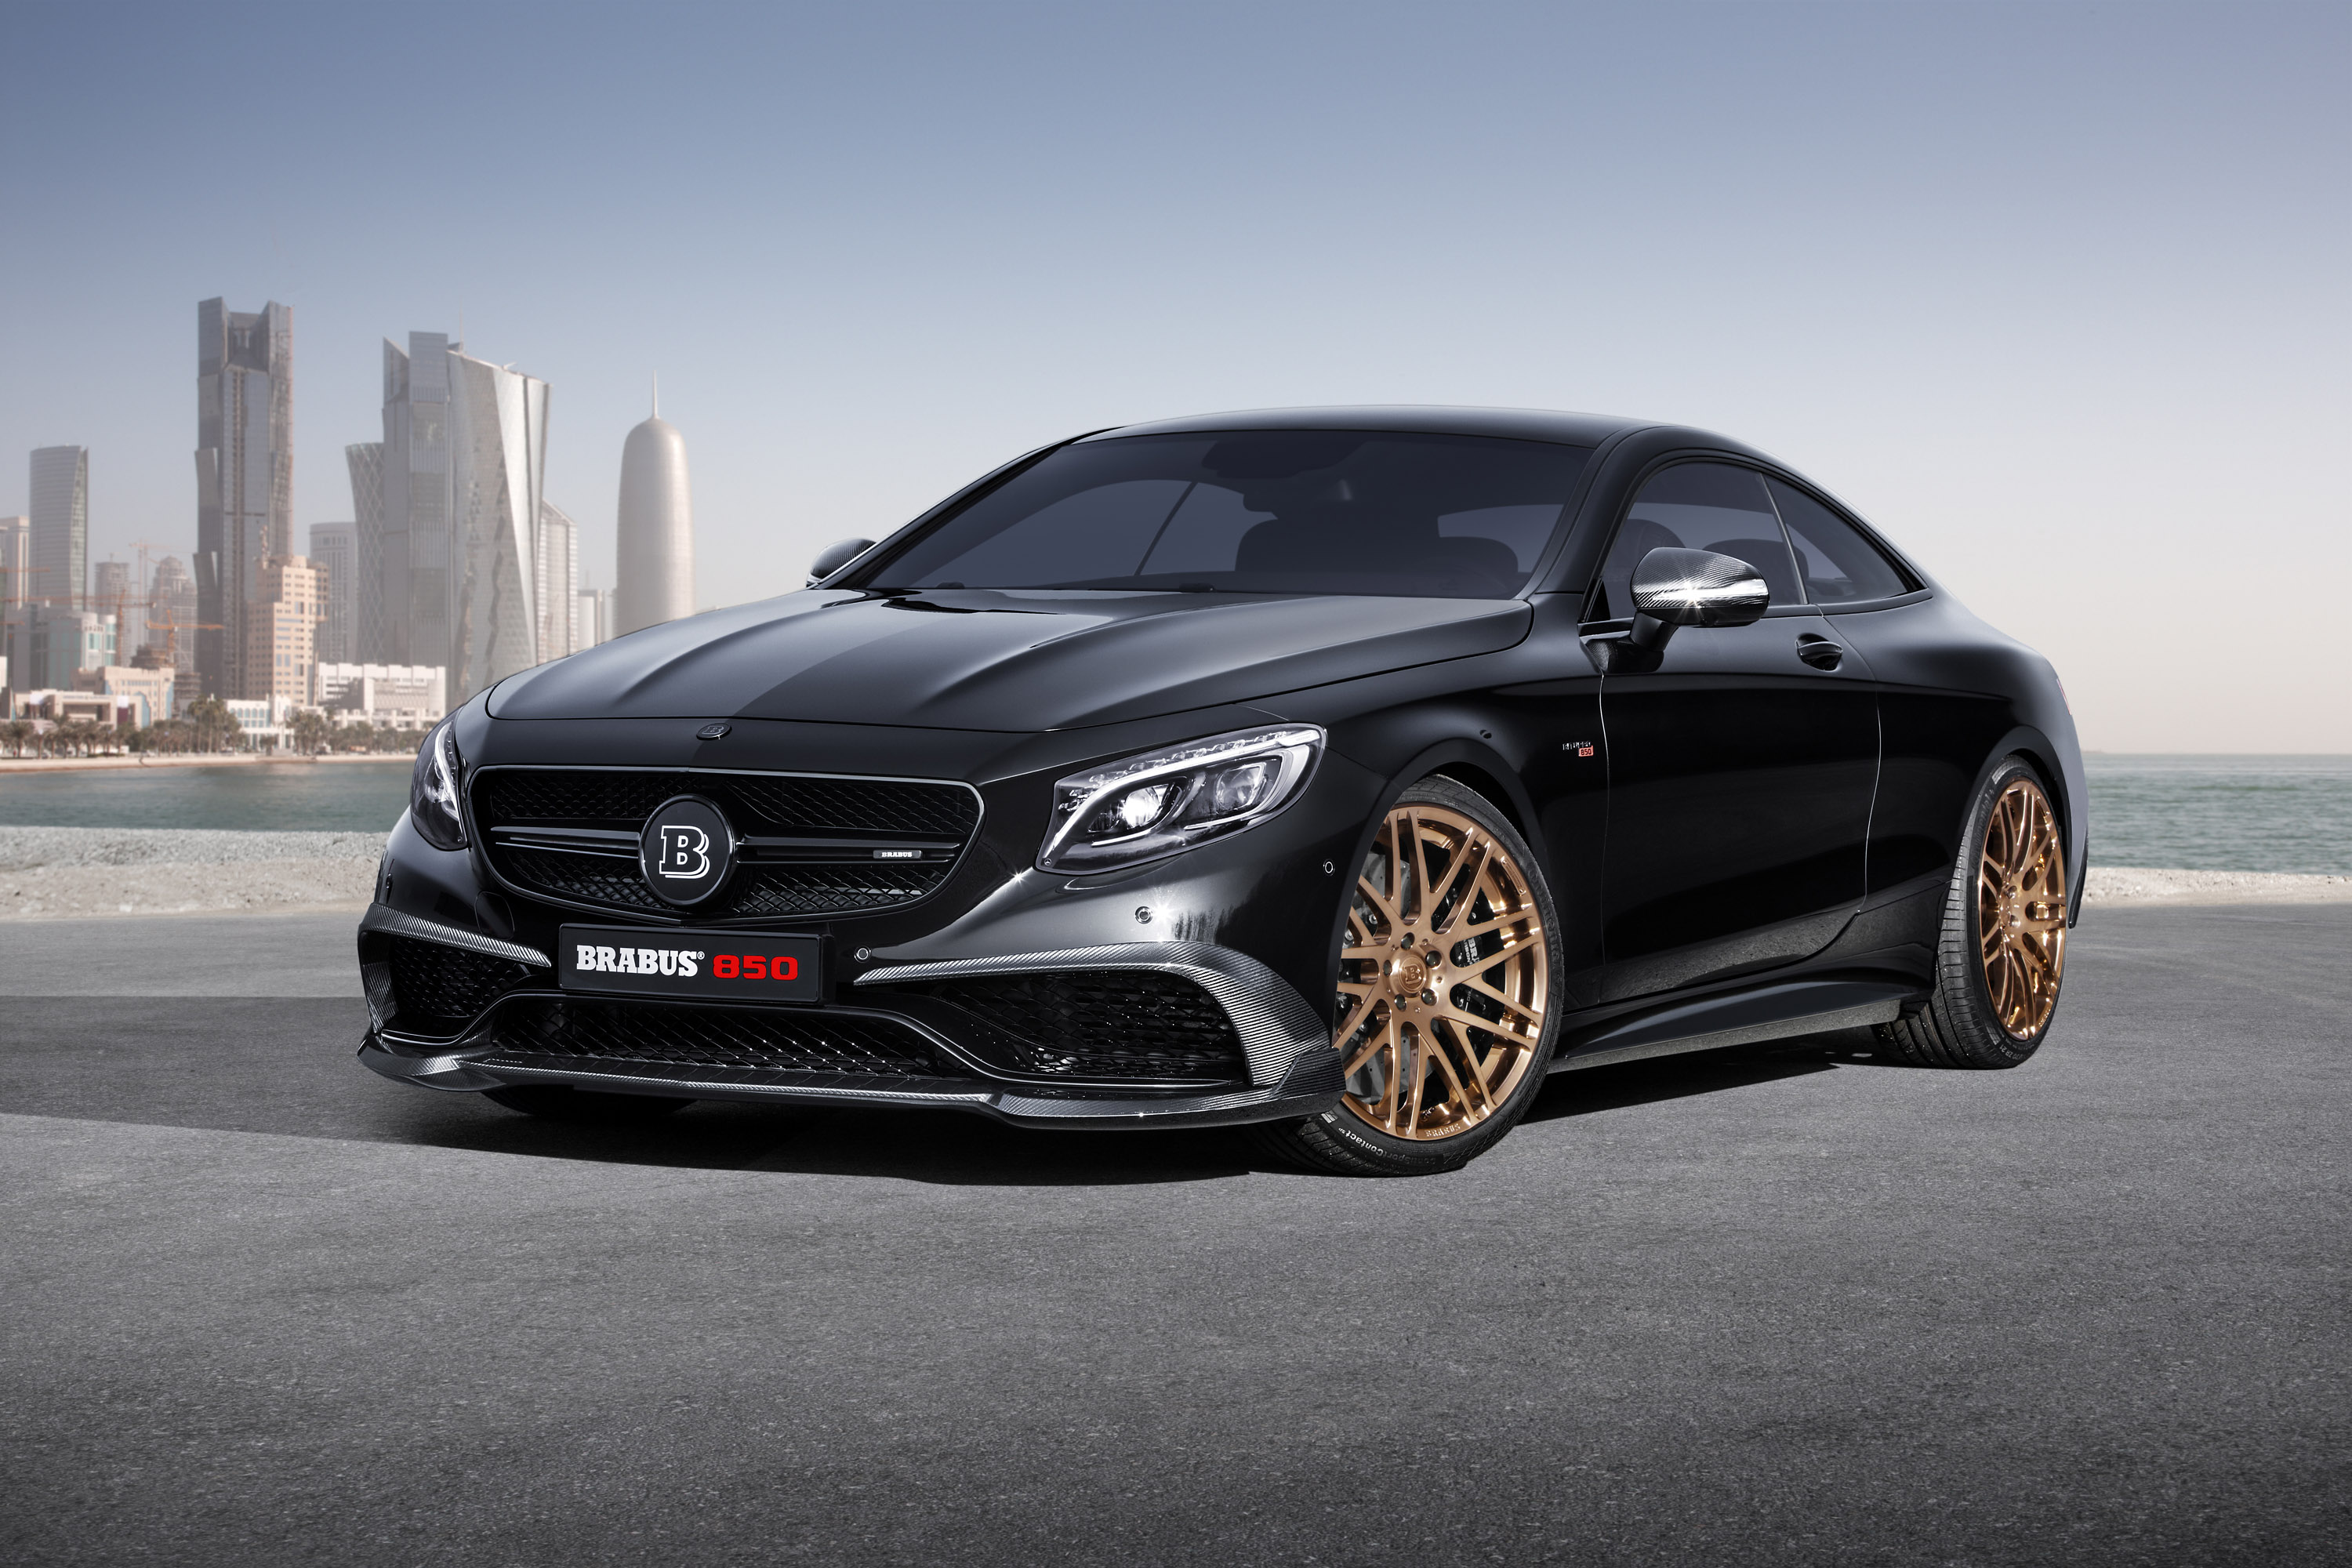 Brabus Mercedes-Benz S63 4Matic Coupe photo #1